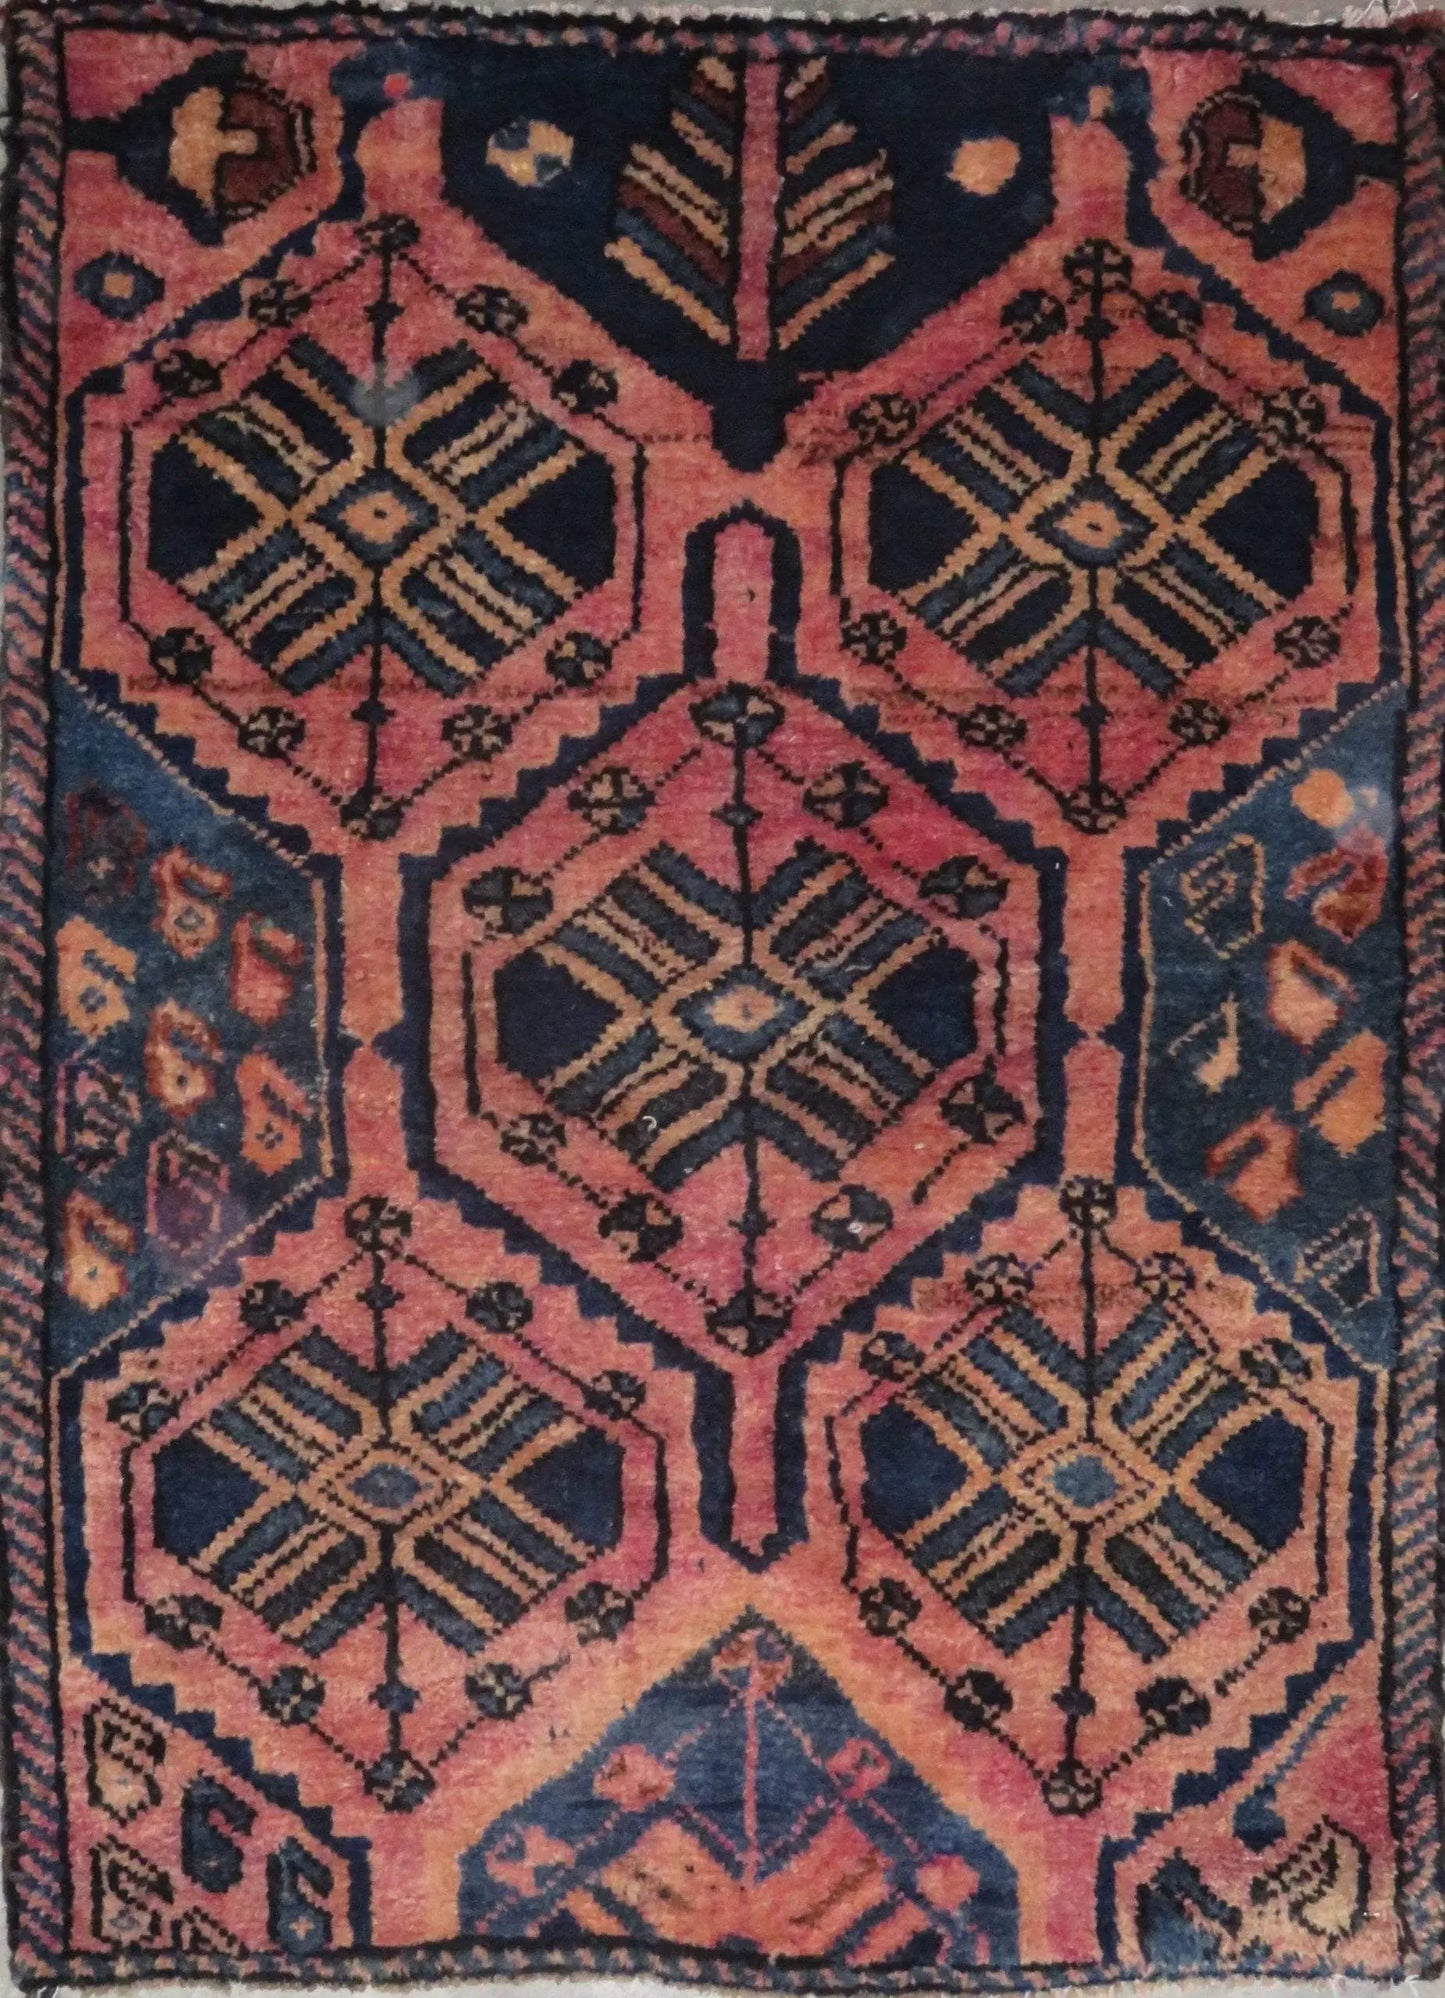 Hand-Knotted Vintage Rug 4'1" x 2'8"